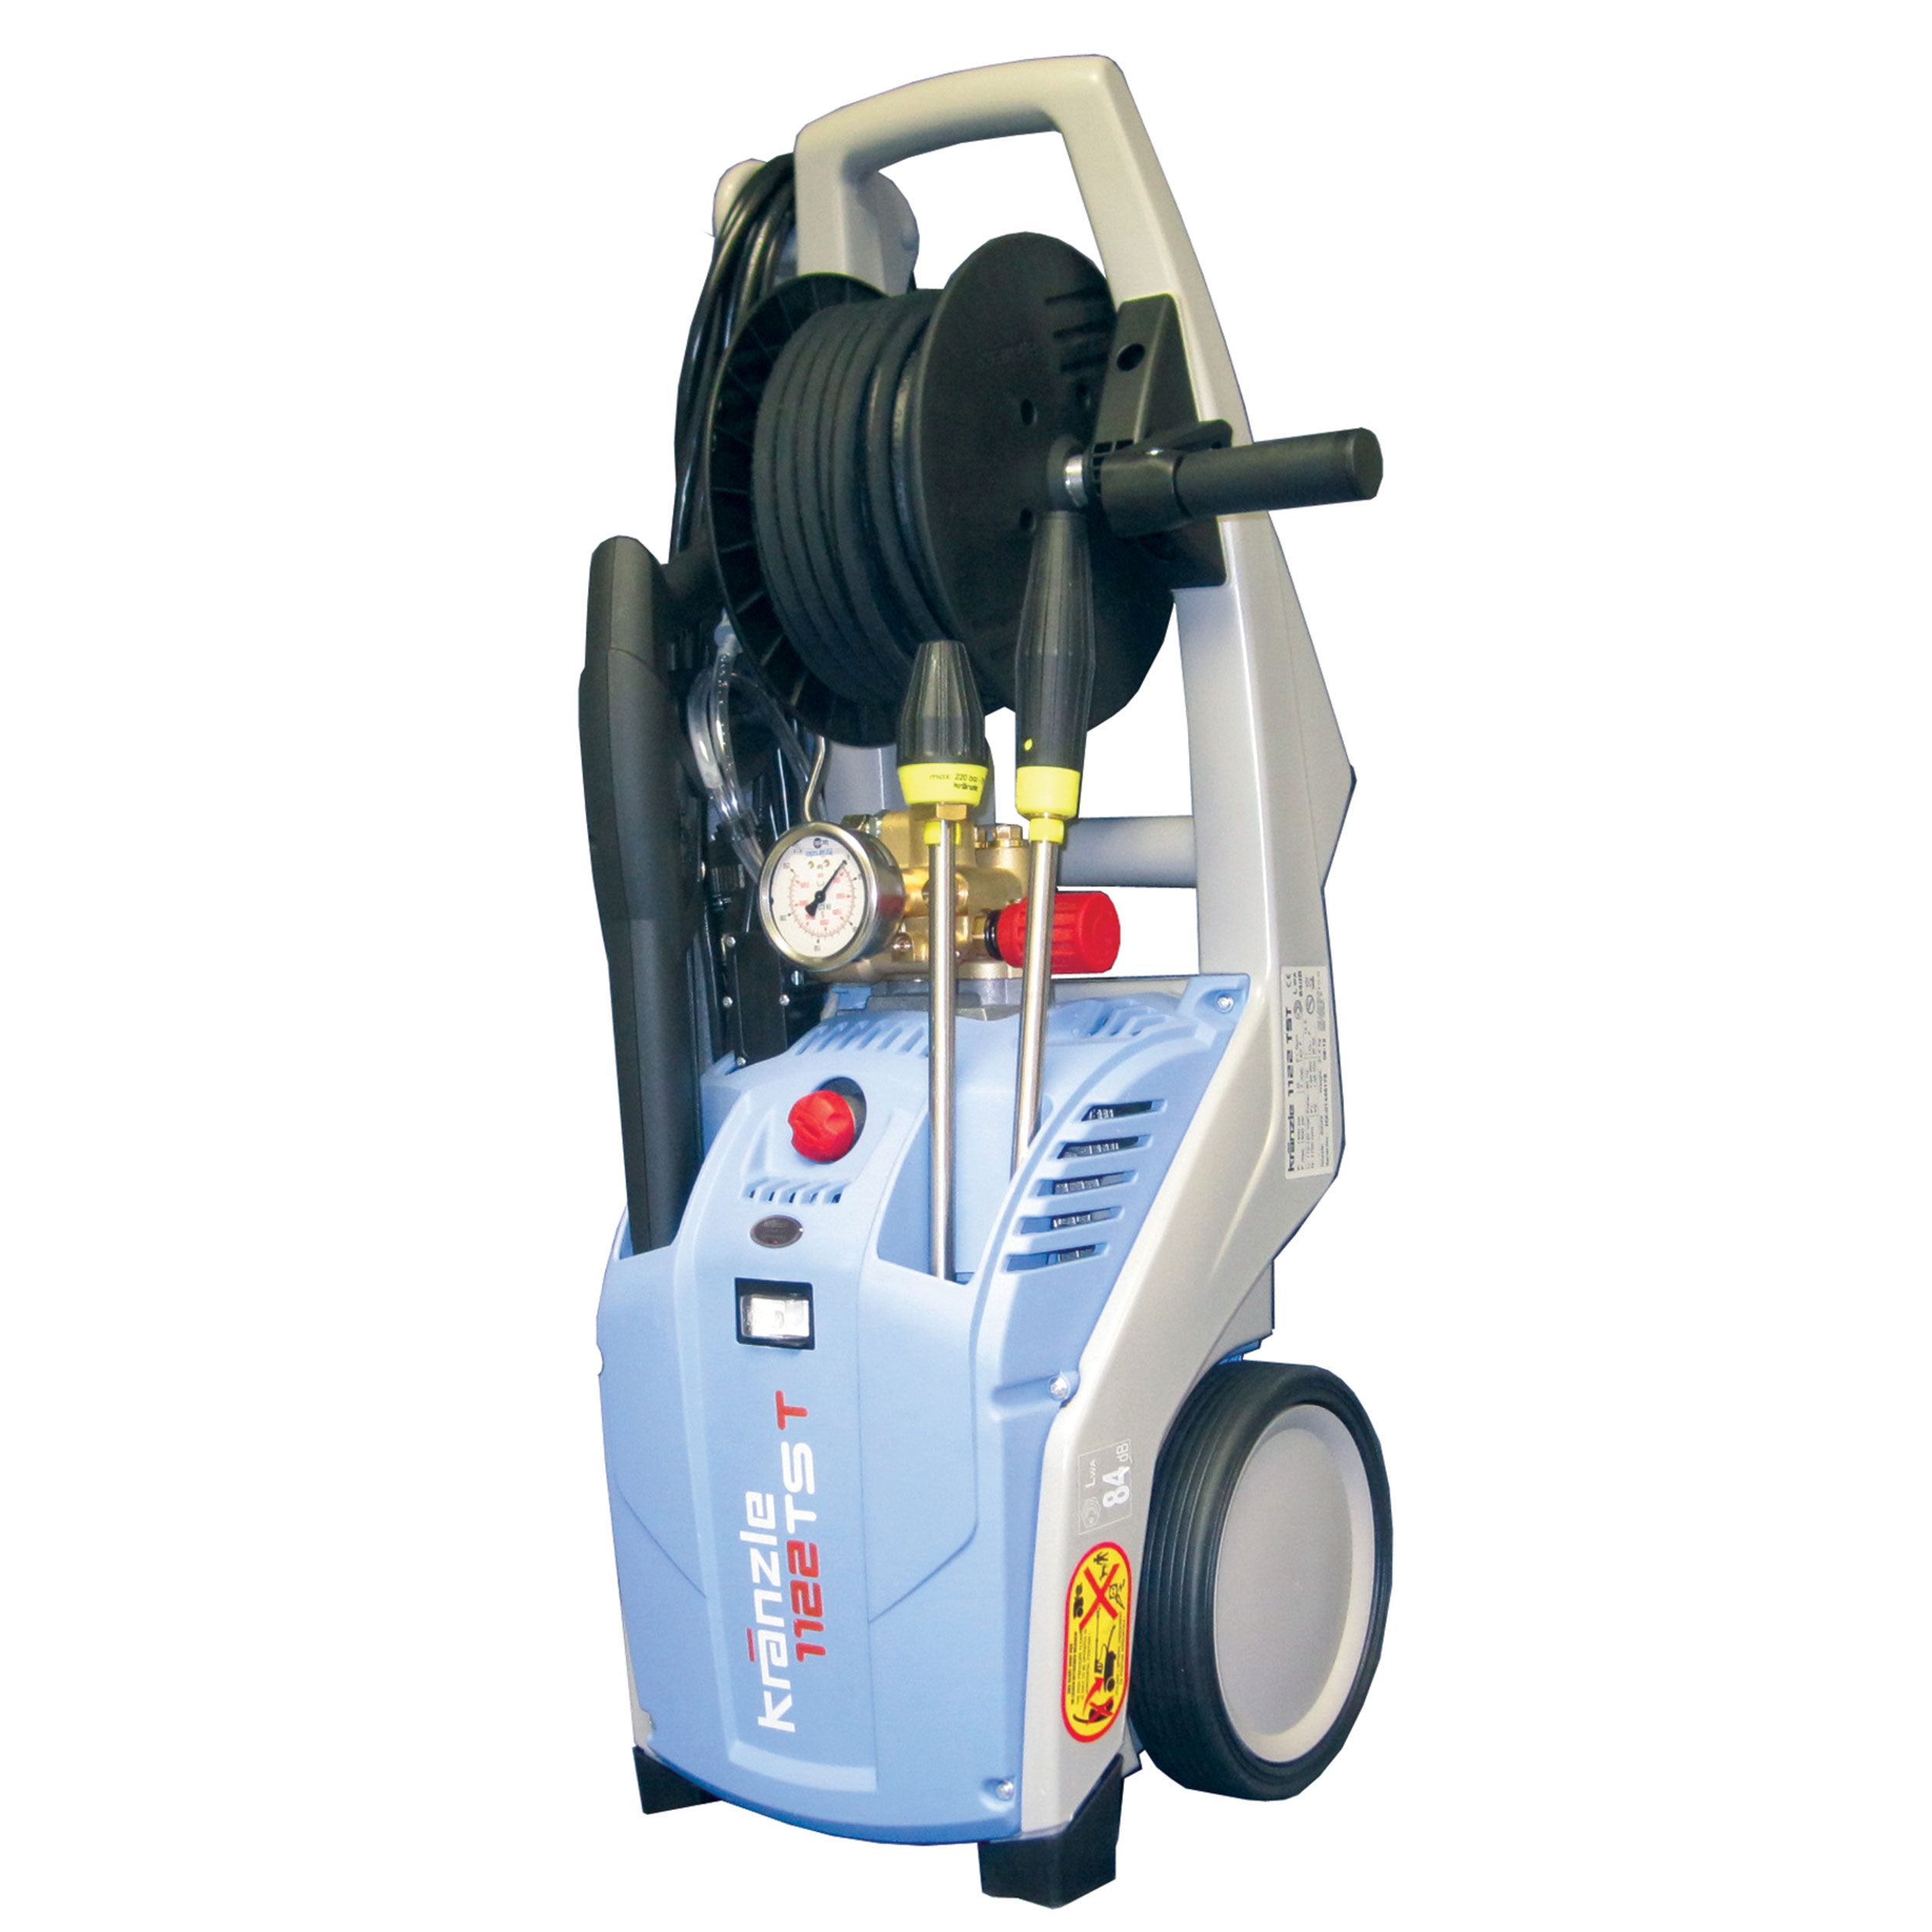 K1122tst Pressure Washer, Cold Water, 110v, 15a, Gfi